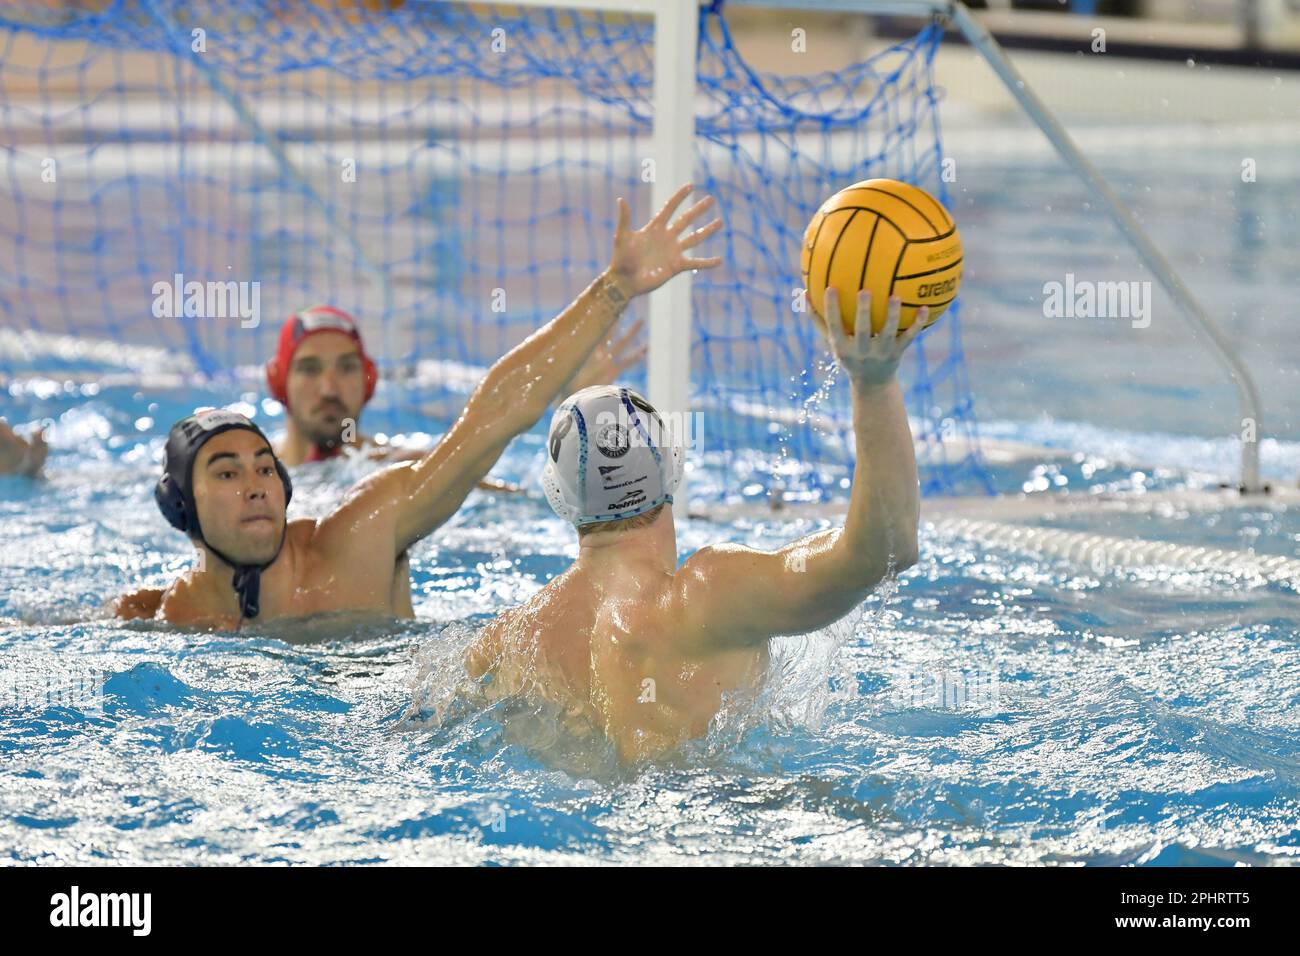 Trieste, Italy. 29th Mar, 2023. Giacomo Bini (Pallanuoto Trieste) during Pallanuoto Trieste vs Telimar, Waterpolo Italian Serie A match in Trieste, Italy, March 29 2023 Credit: Independent Photo Agency/Alamy Live News Stock Photo